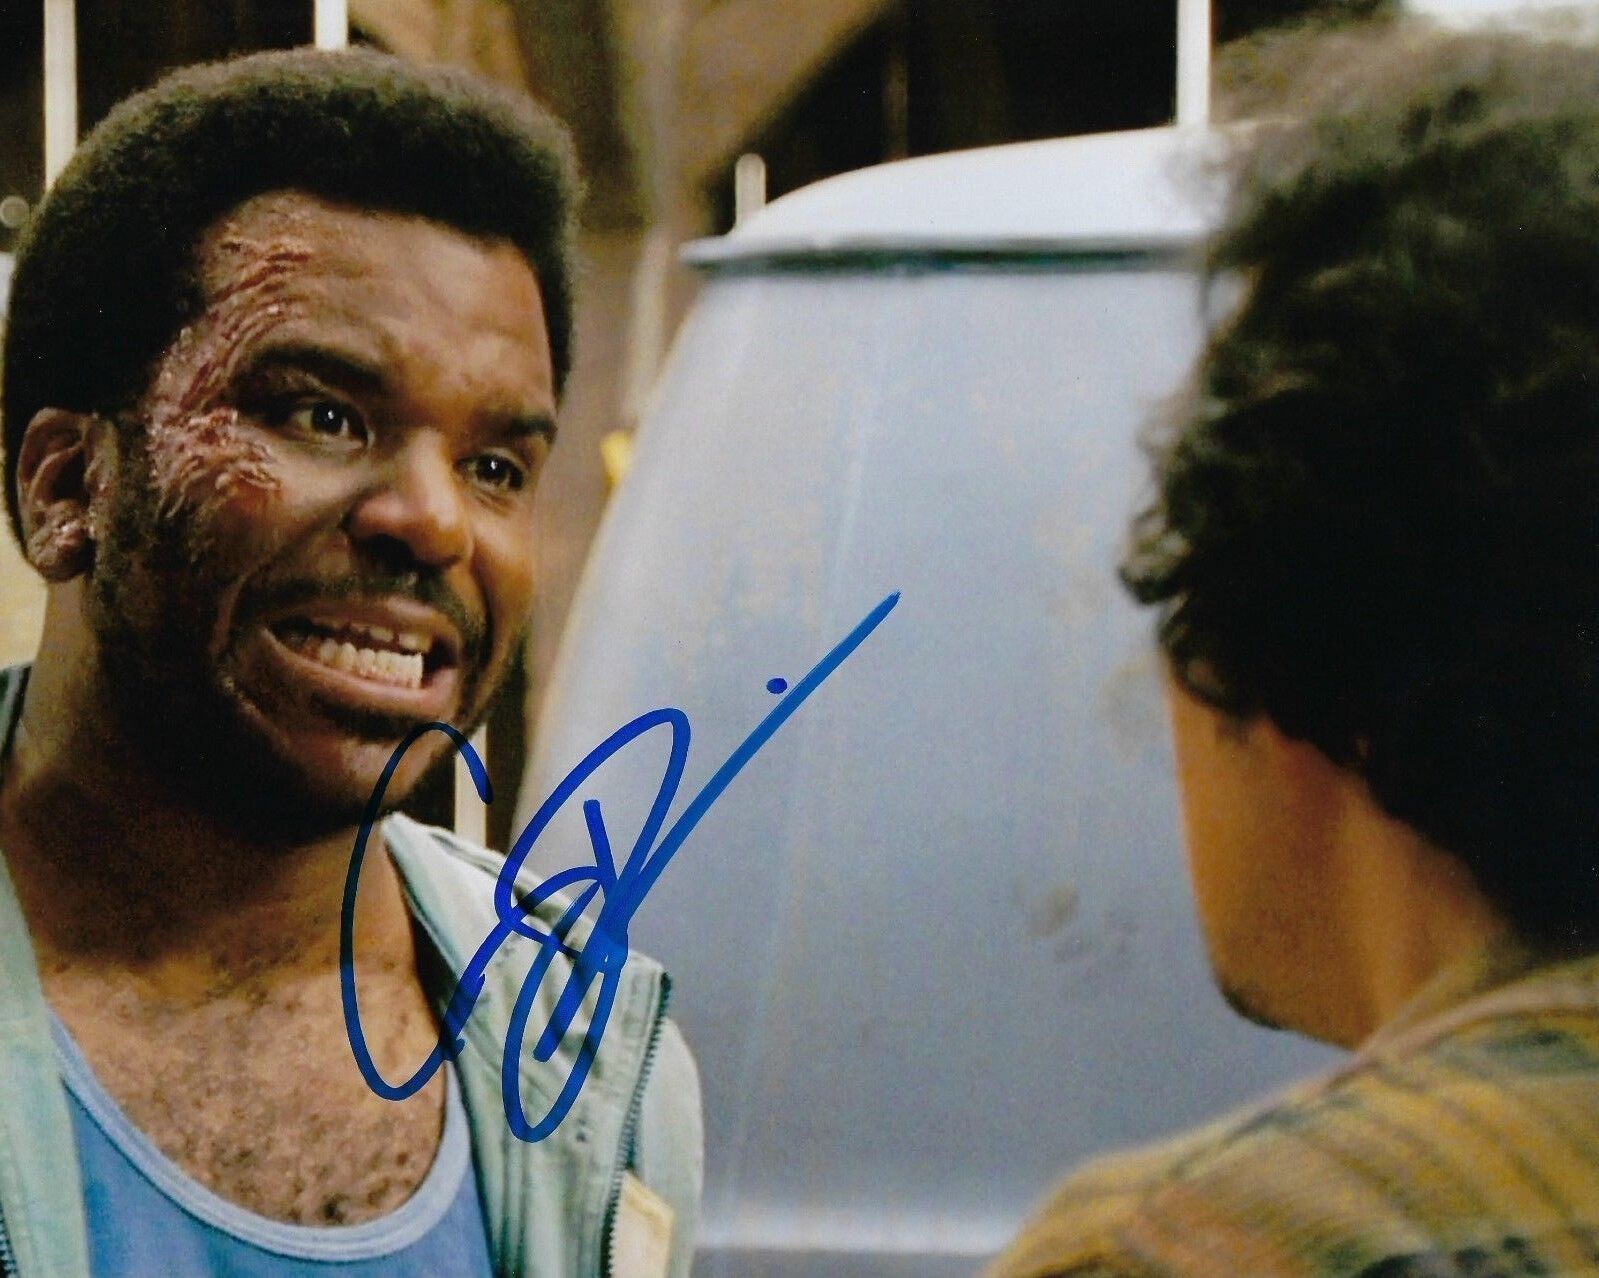 GFA Pineapple Express * CRAIG ROBINSON * Signed 8x10 Photo Poster painting PROOF AD2 COA